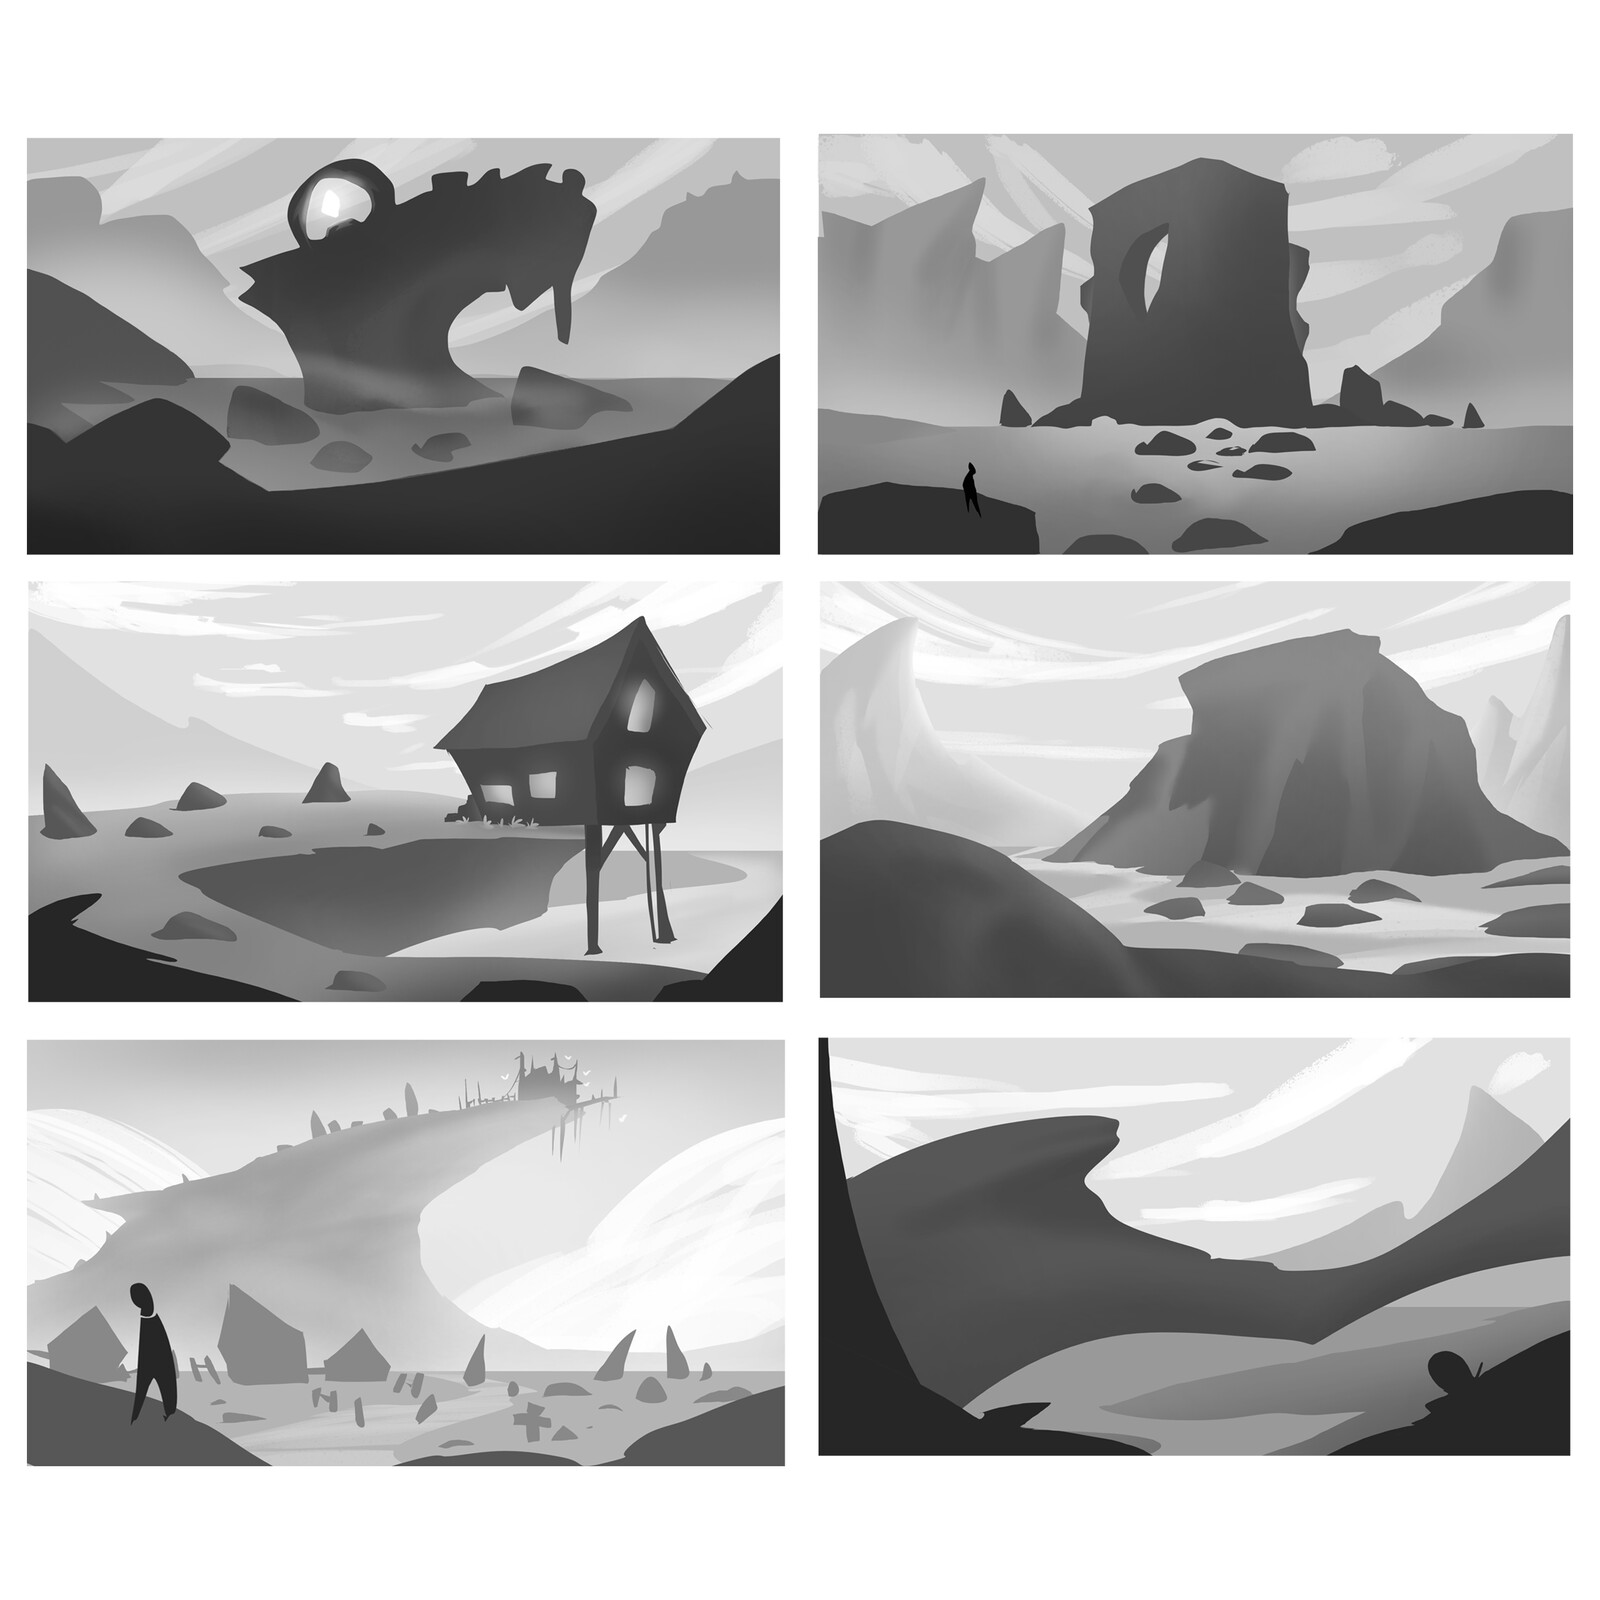 Thumbnails and Values